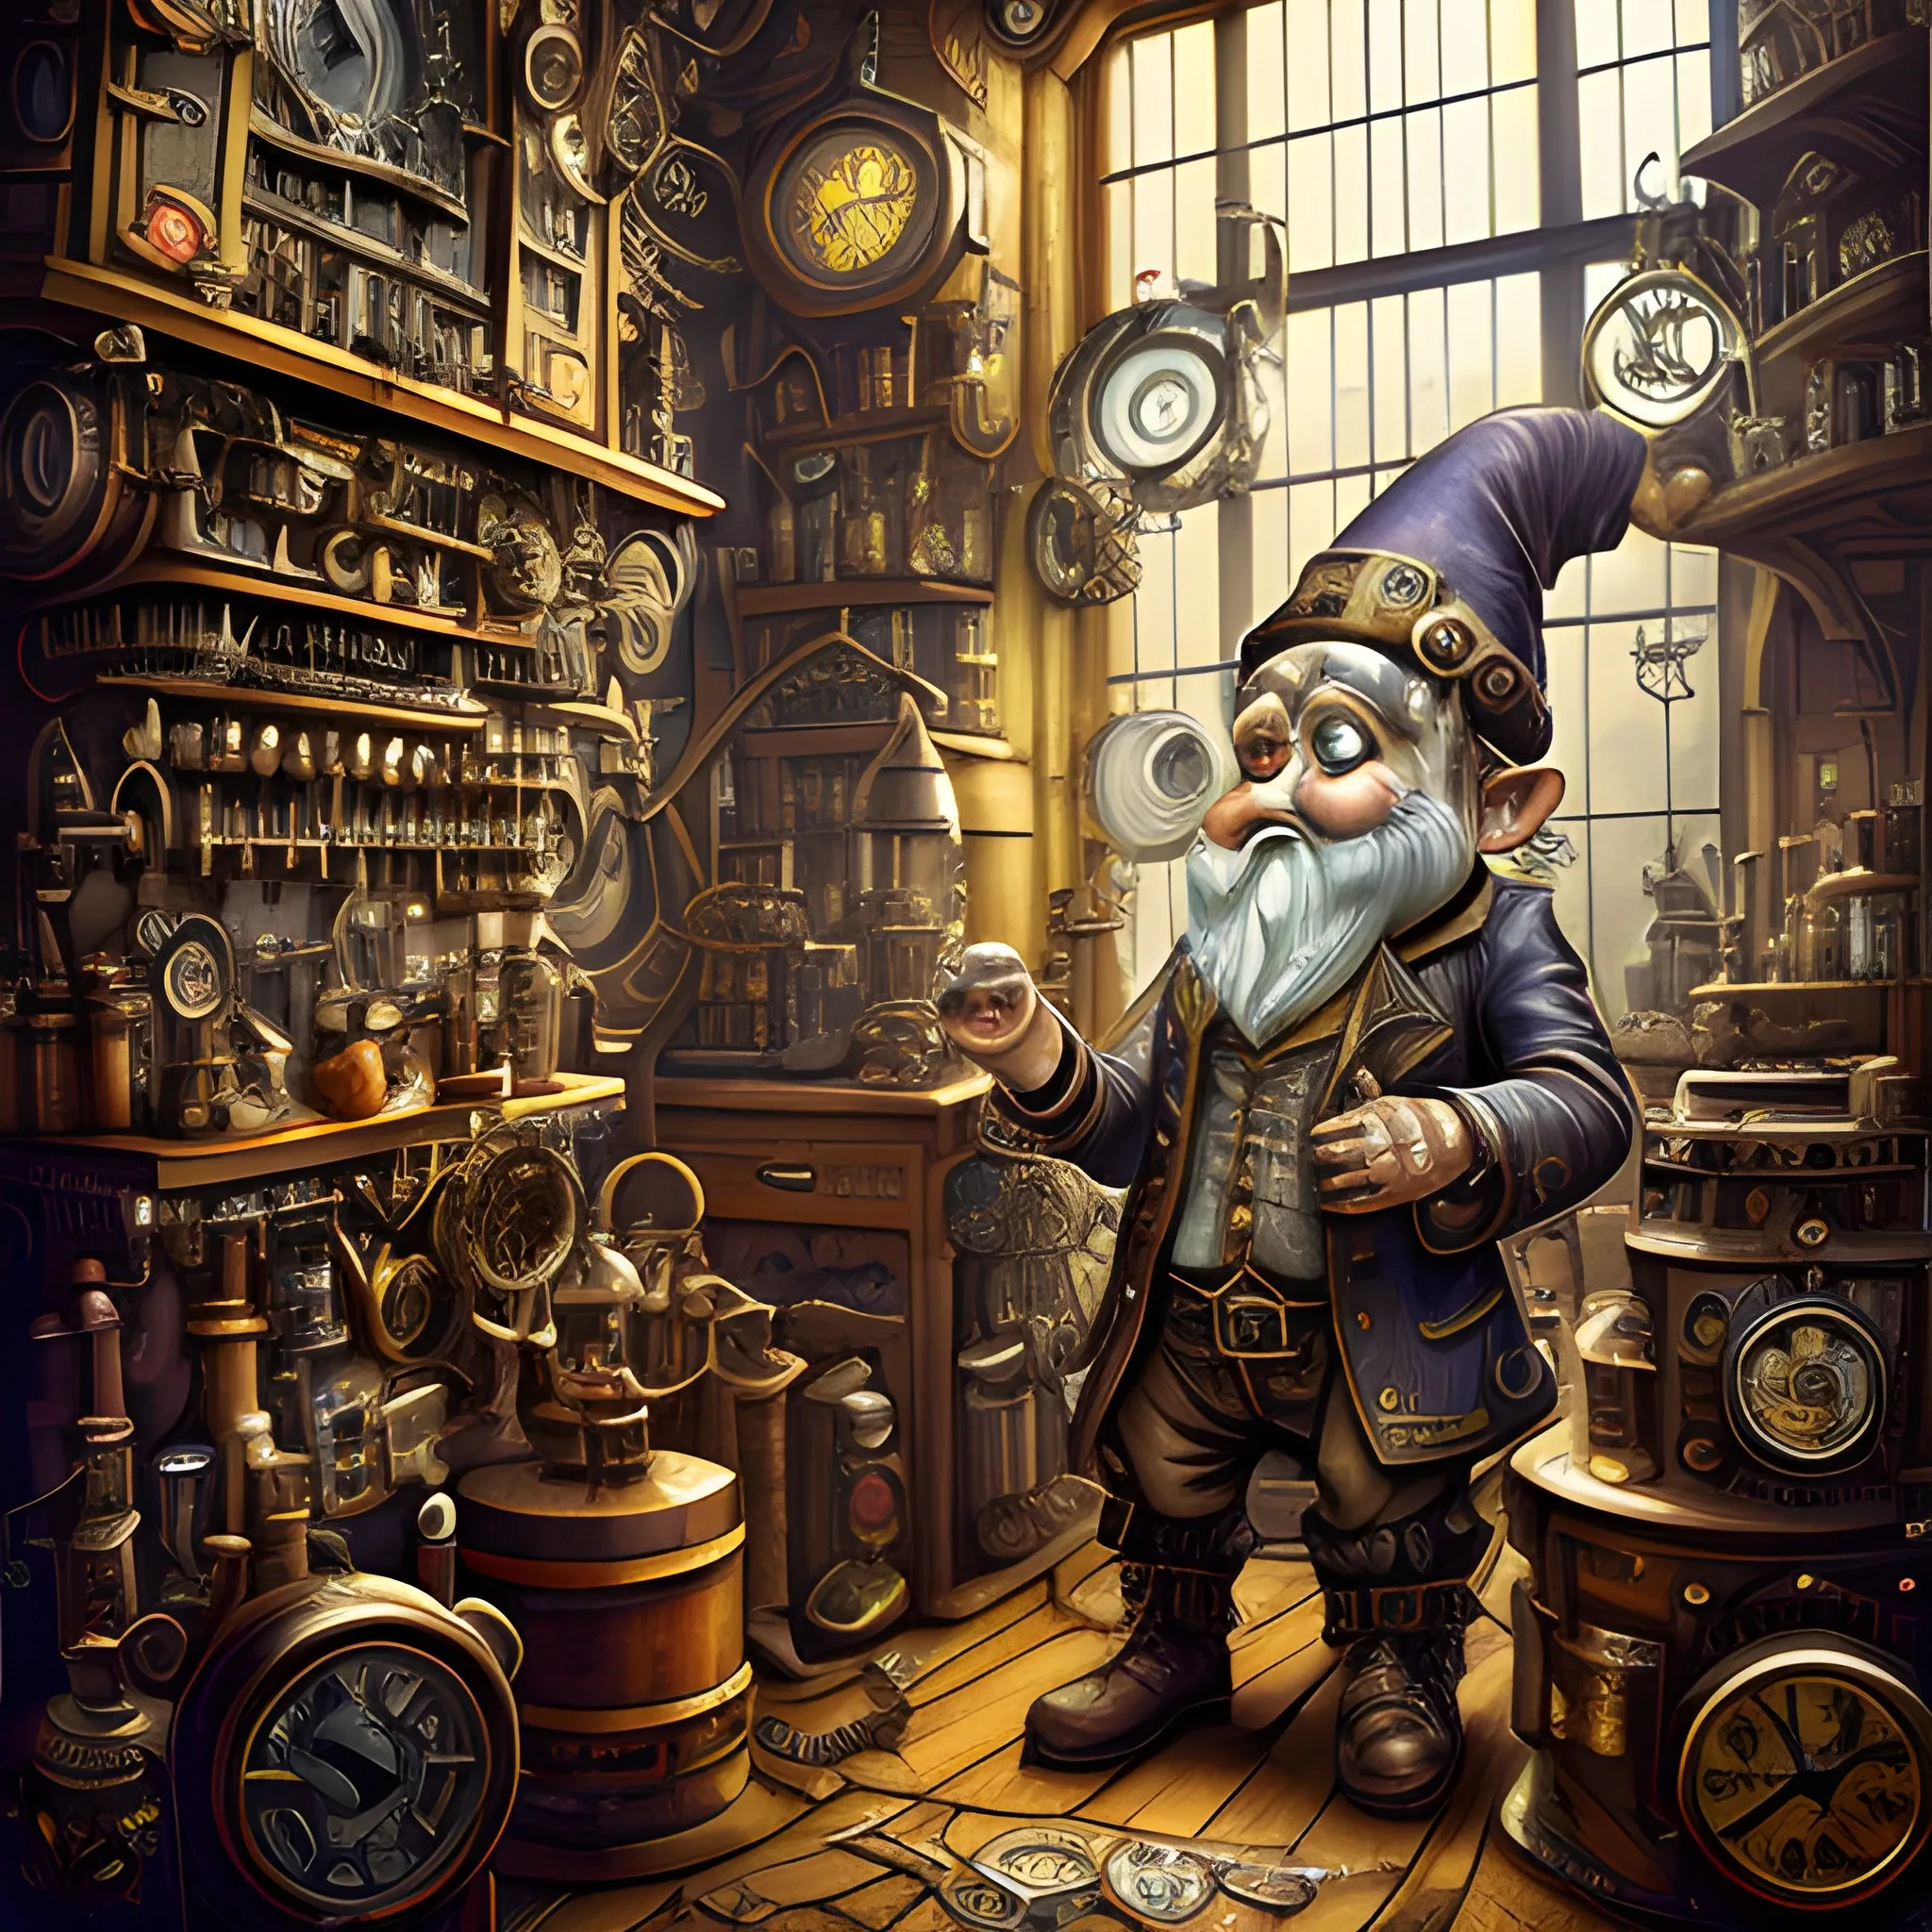 A steampunk-inspired digital illustration of a gnome inventor in a cluttered workshop, surrounded by intricate machinery and gears. The camera angle is a medium shot, capturing the gnome's enthusiastic expression as he tinkers with a fantastical contraption. The lighting is warm and atmospheric, with rays of sunlight streaming through stained glass windows, casting vibrant colors and ((shadows)) across the room. The style combines elements of steampunk and clock-punk, resembling the works of Jules Verne and H.R. Giger. The image is detailed and intricate, showcasing the gnome's ingenious inventions and the mesmerizing complexity of the steampunk world. It is a visually stunning artwork that captures the imagination.

